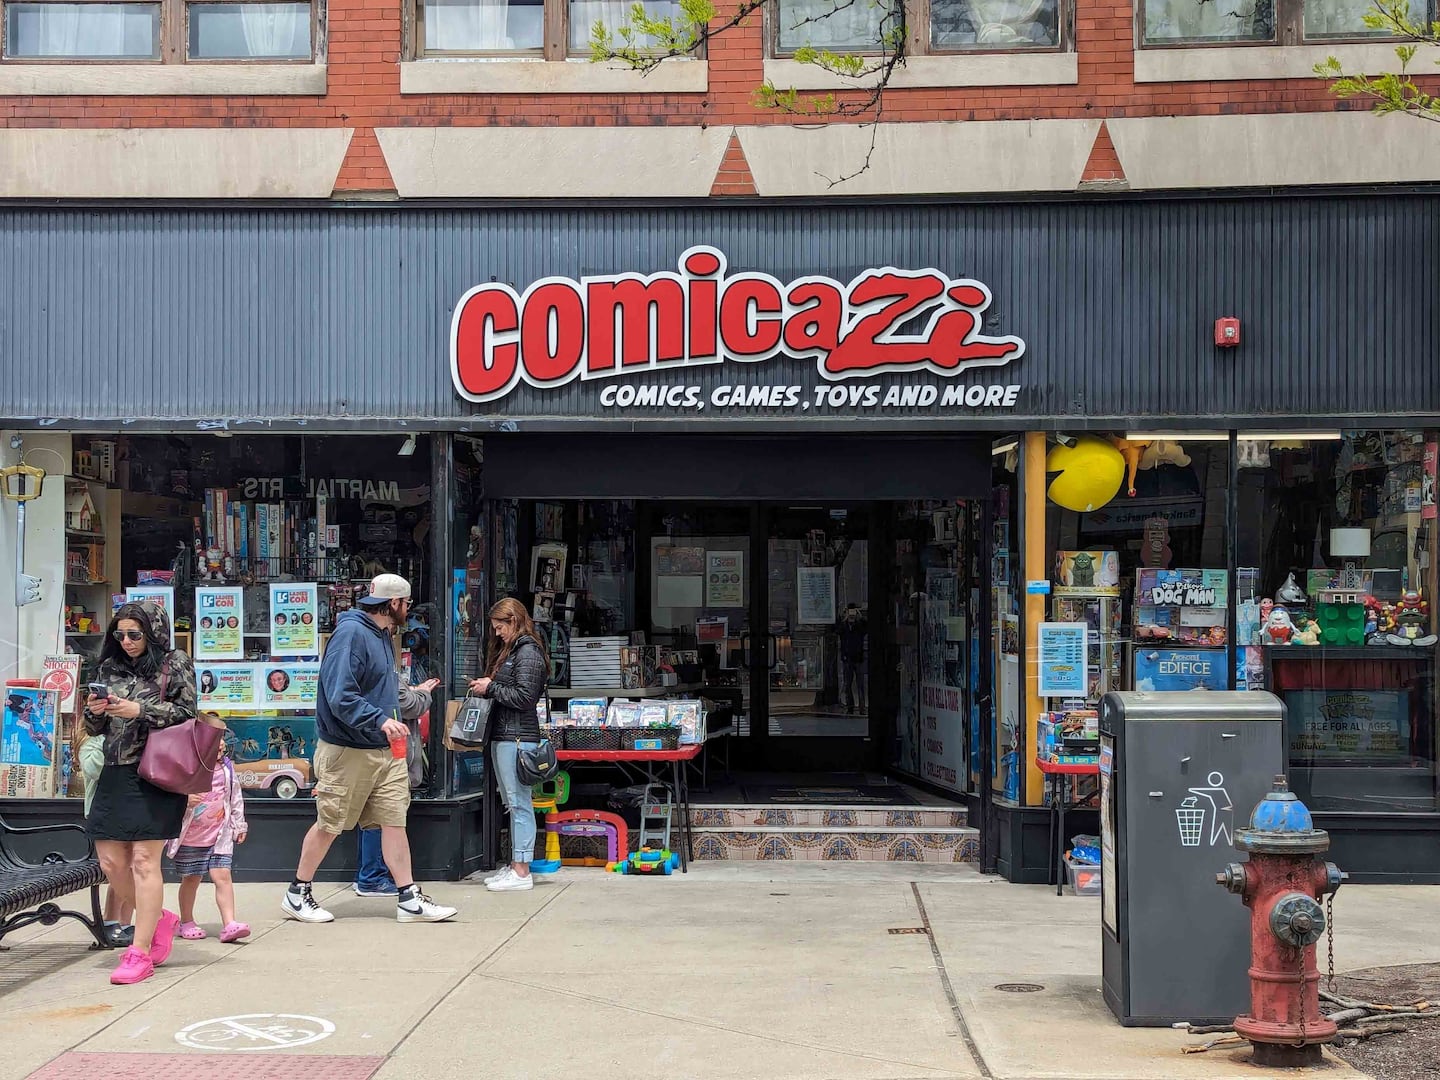 Comicazi in Davis Square champions comic art, graphic novels, and all manner of imaginative imagery.